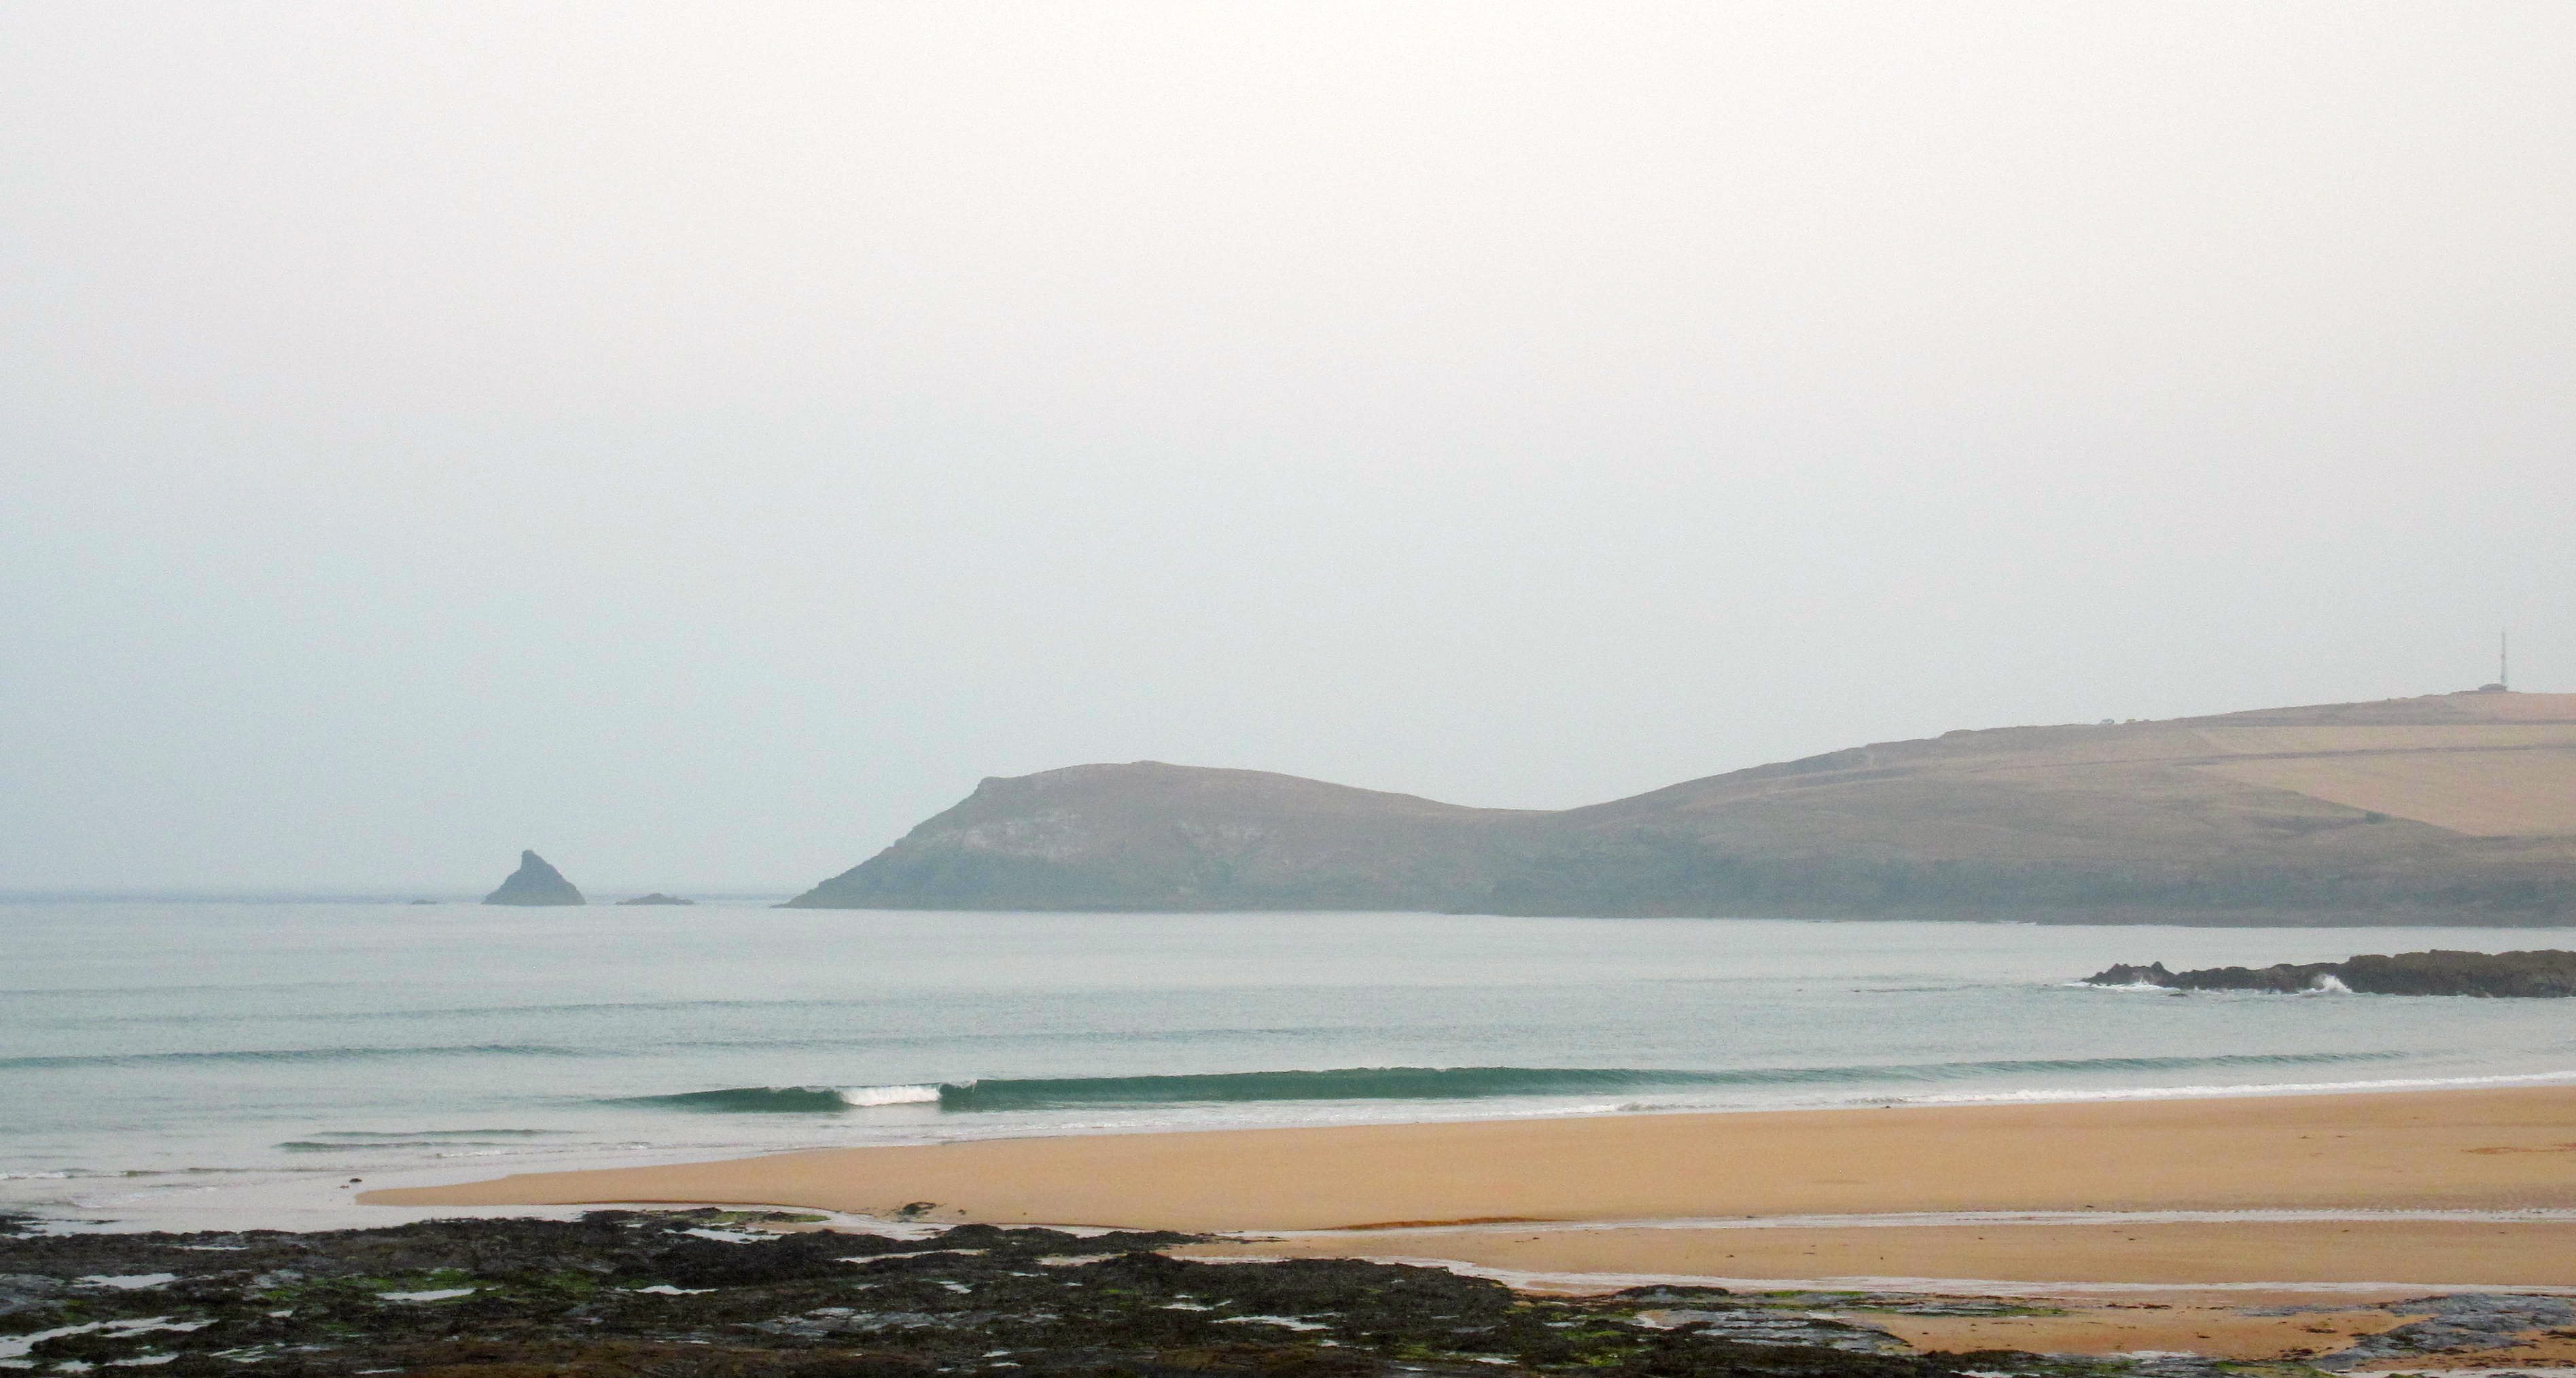 Surf Report for Tuesday 16th September 2014